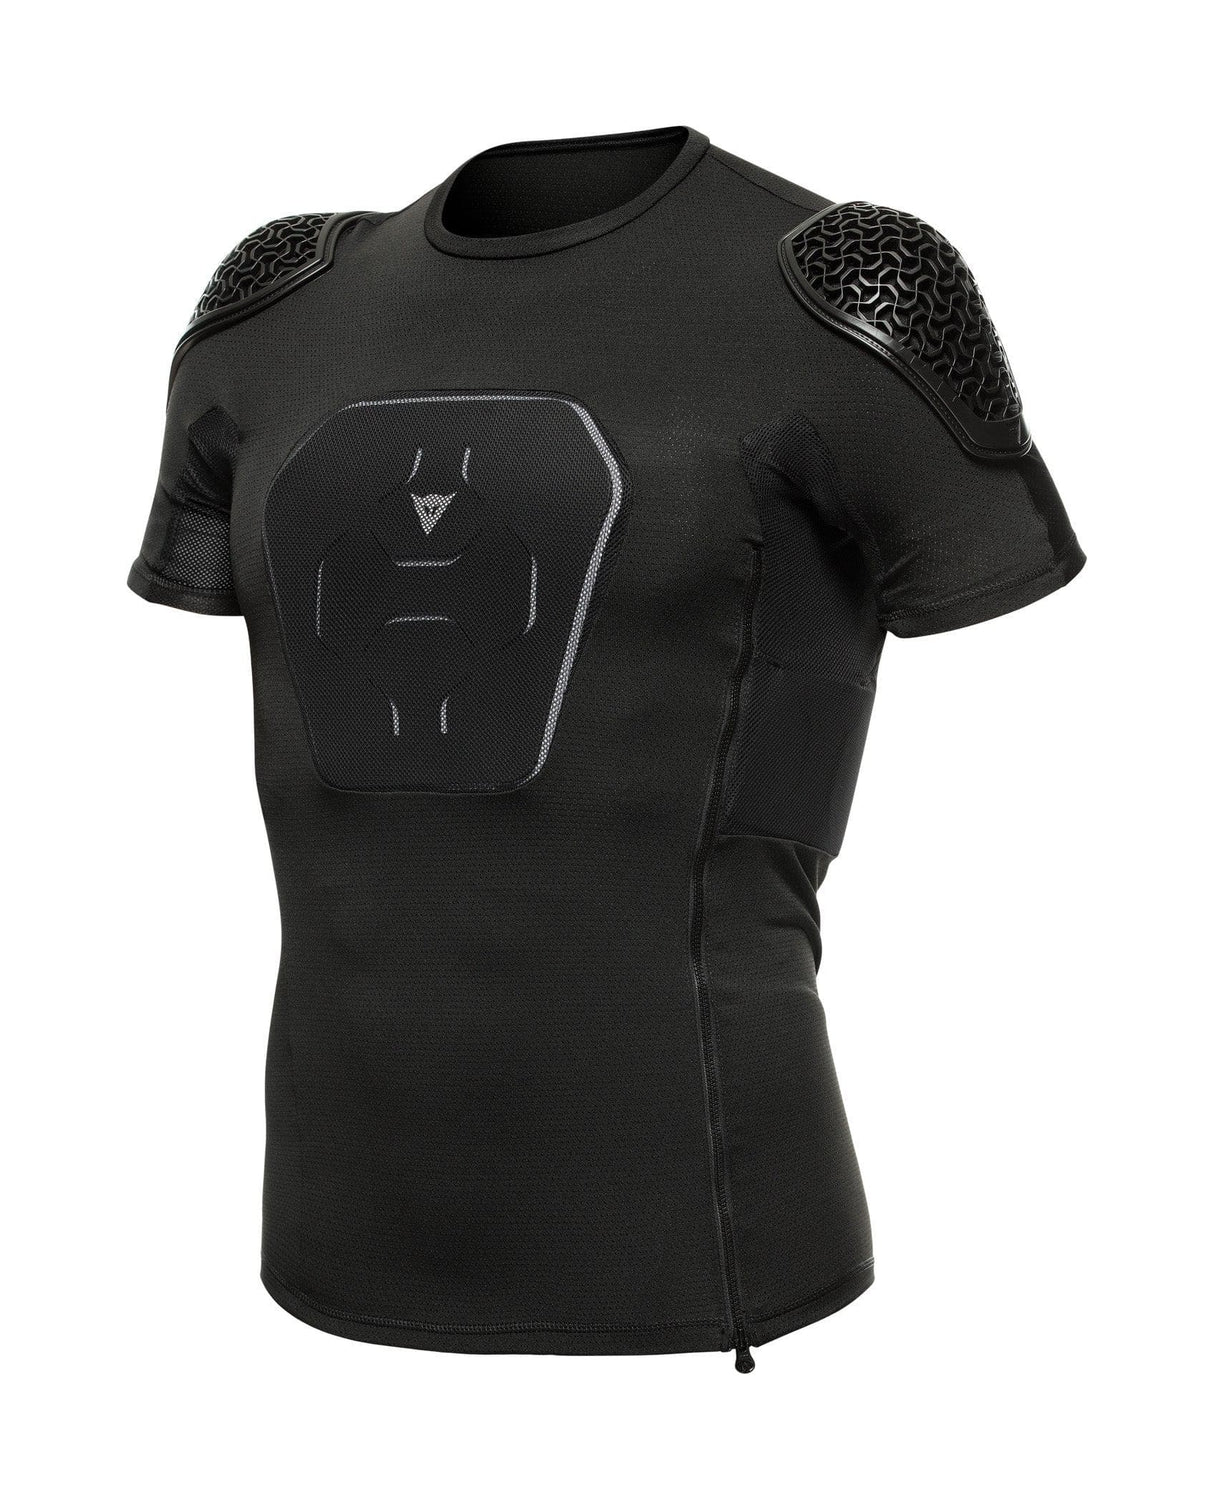 Dainese Rival Pro Armor Tee (Black, S)